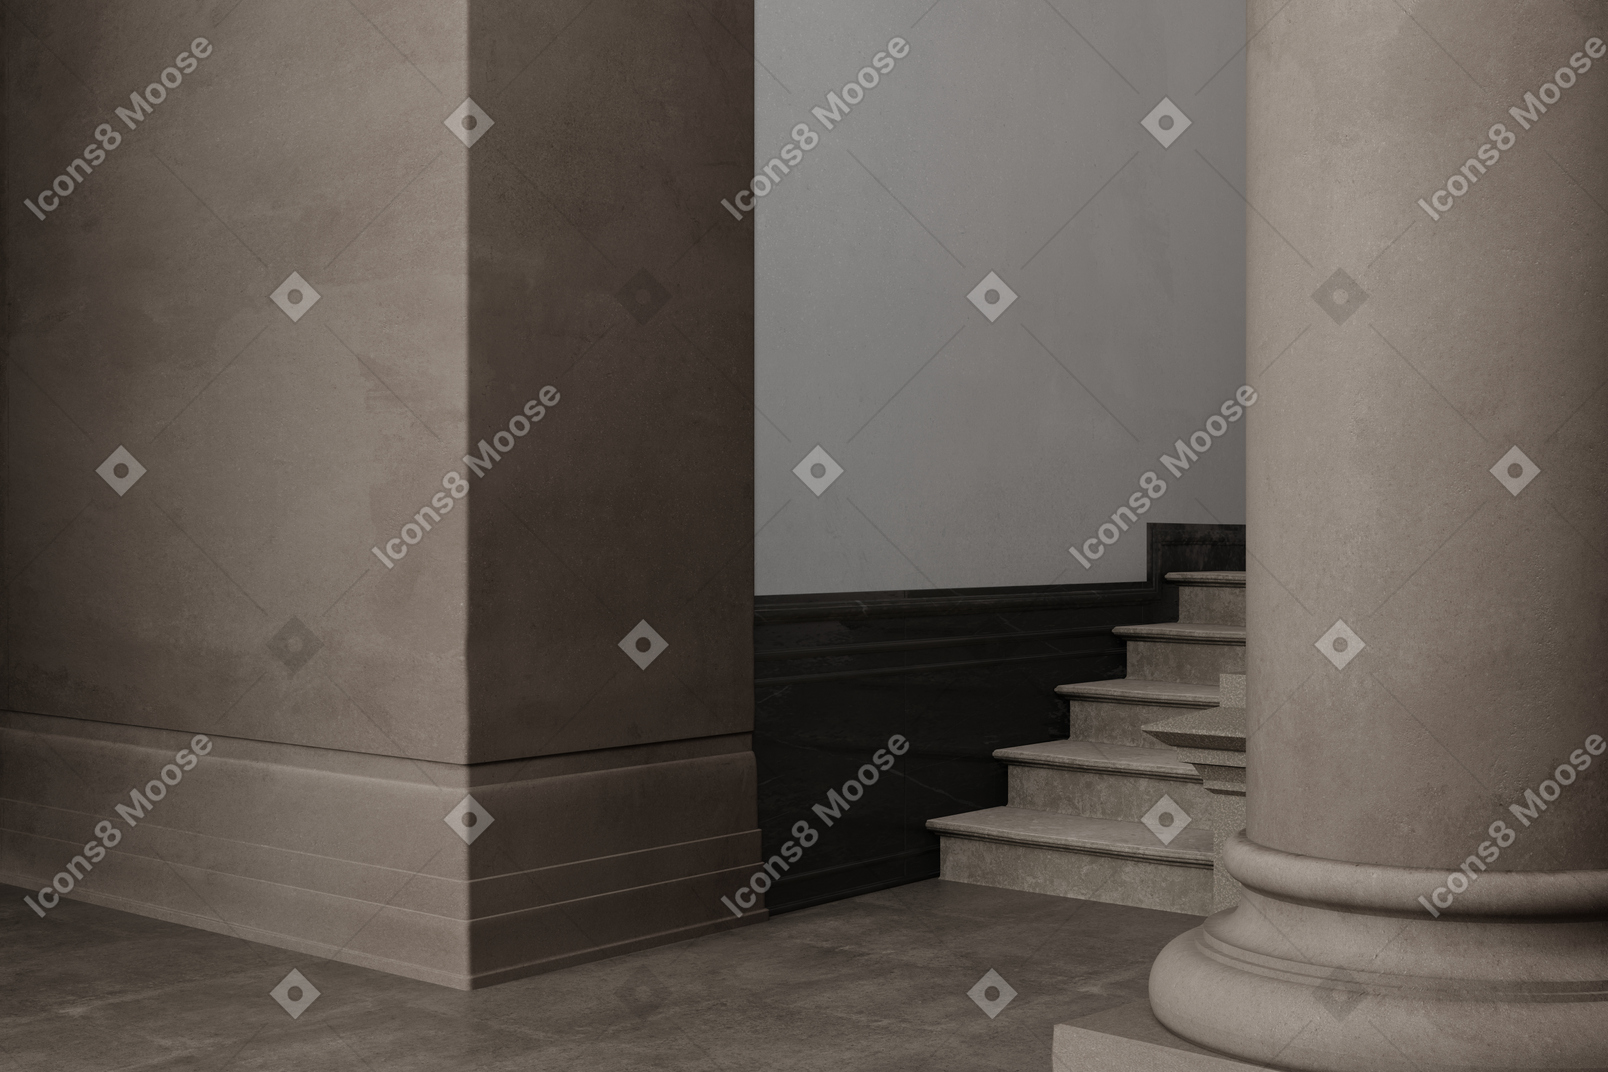 Brown interior with stairs and column